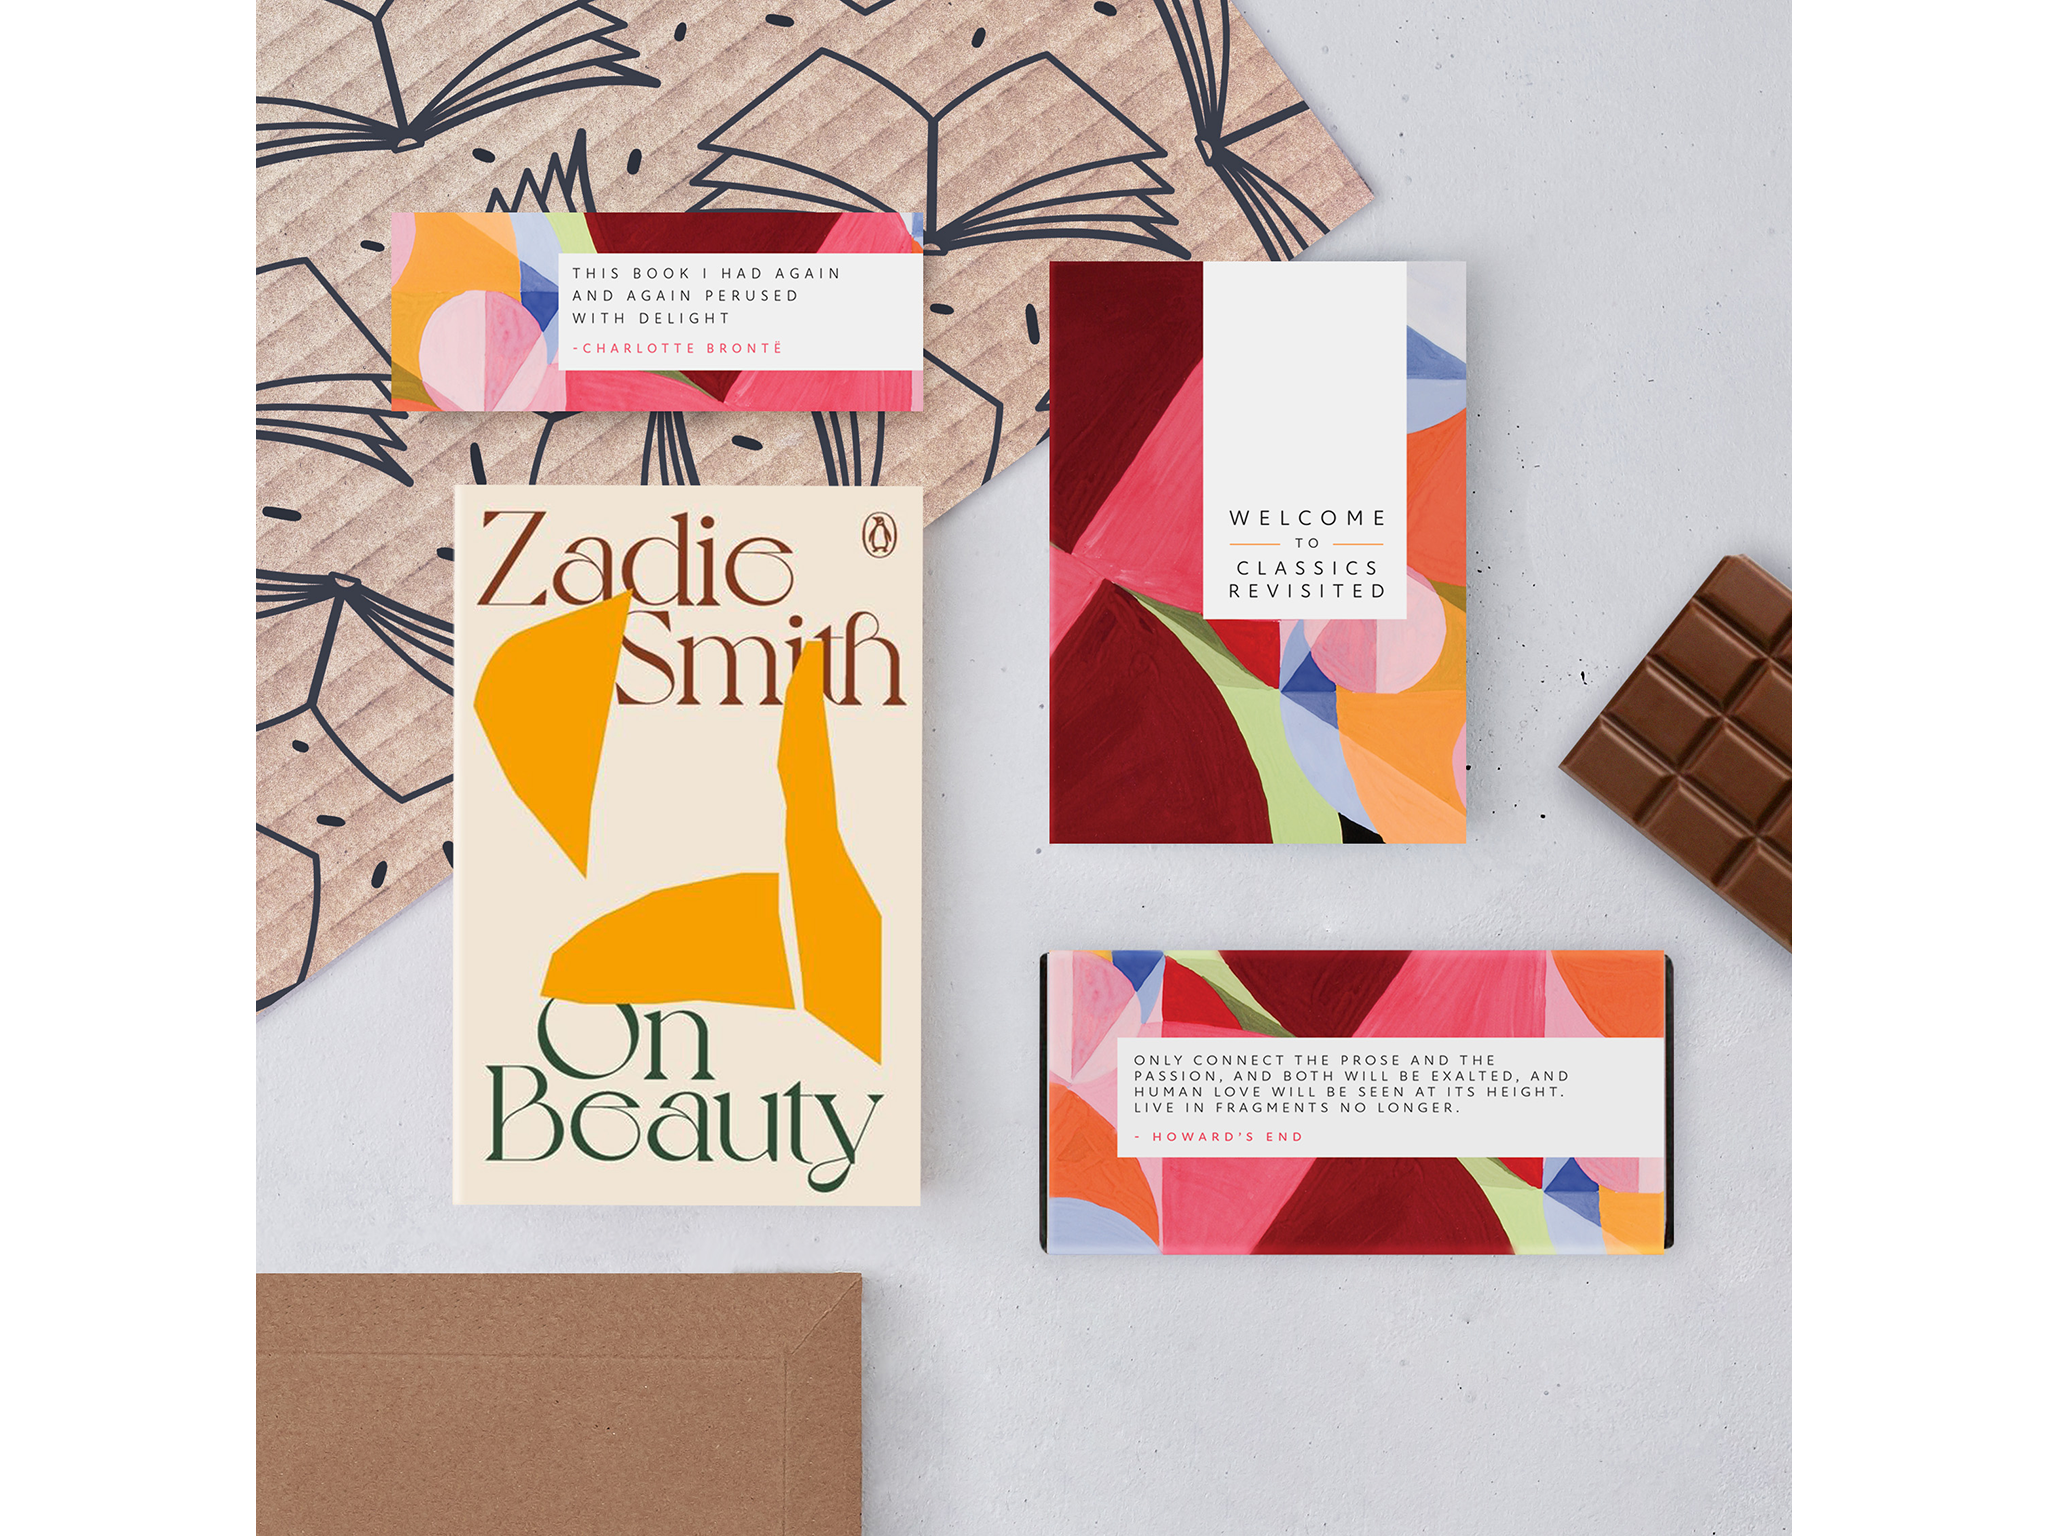 Bookishly classics revisited book and chocolate subscription box.png